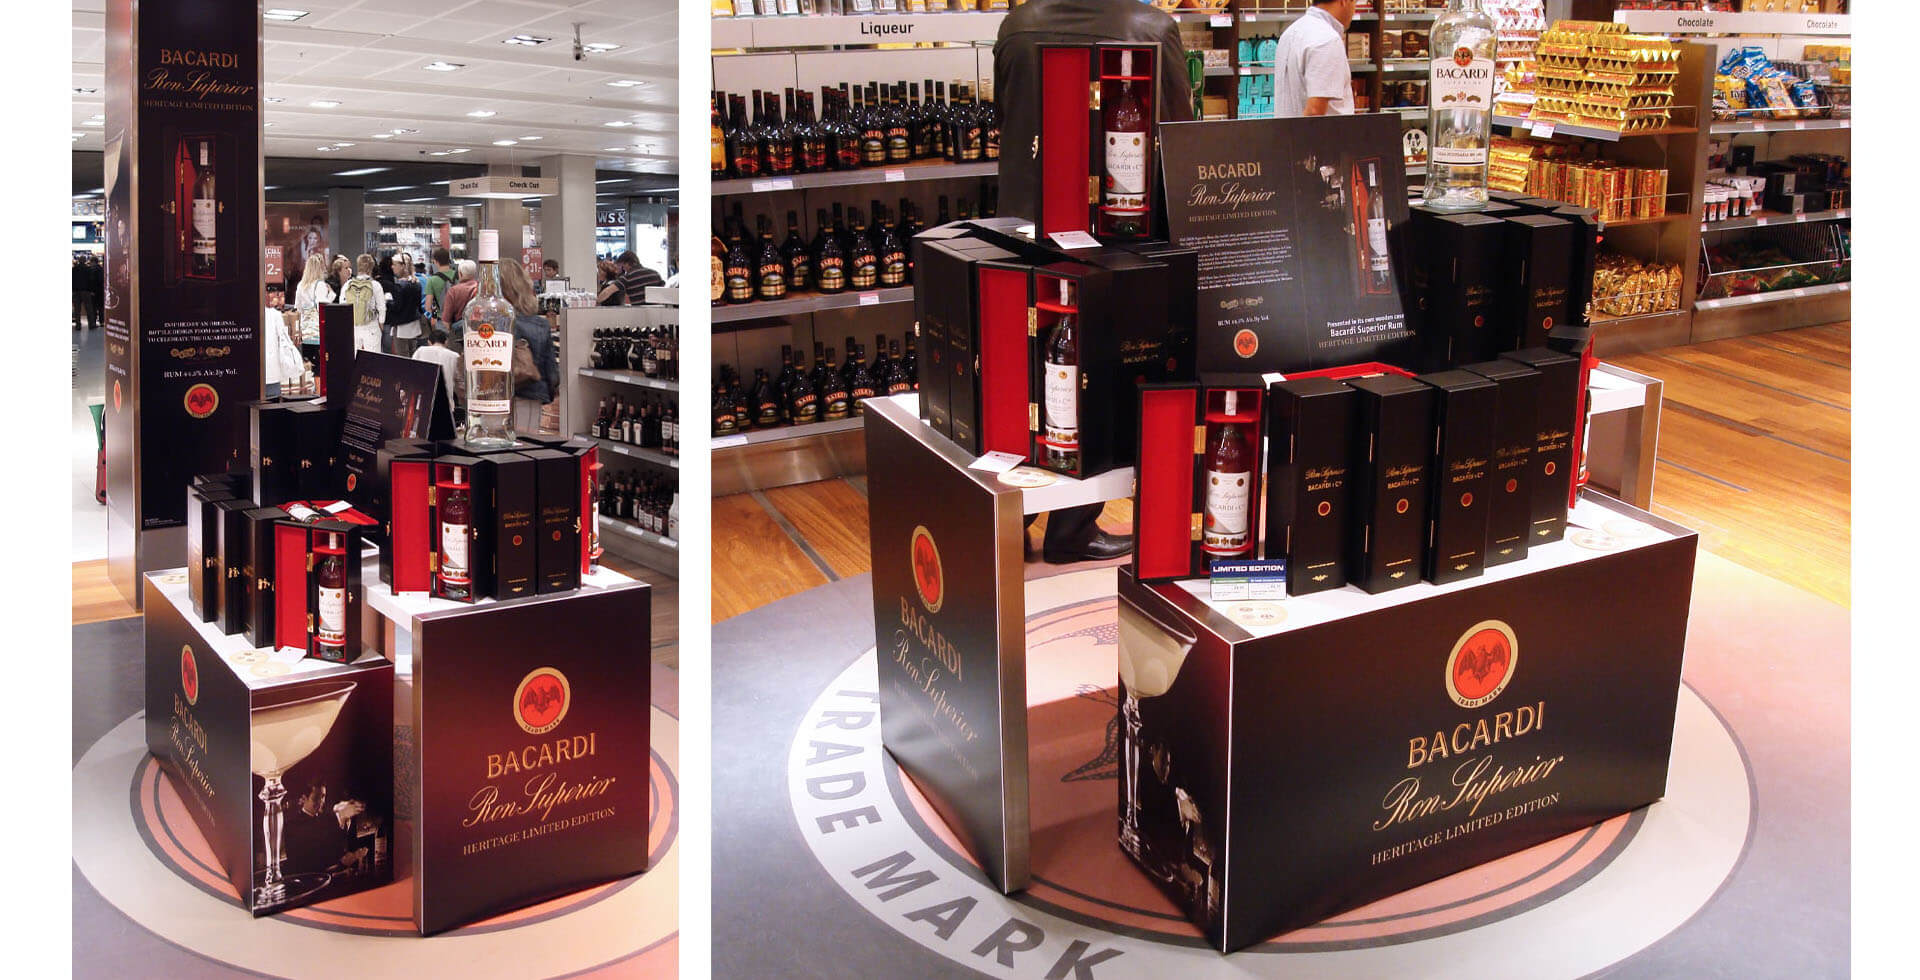 Bacardi Heritage Ron Superior Limited Edition merchandising display brand identity and promotion campaign Global Travel Retail duty free airports 